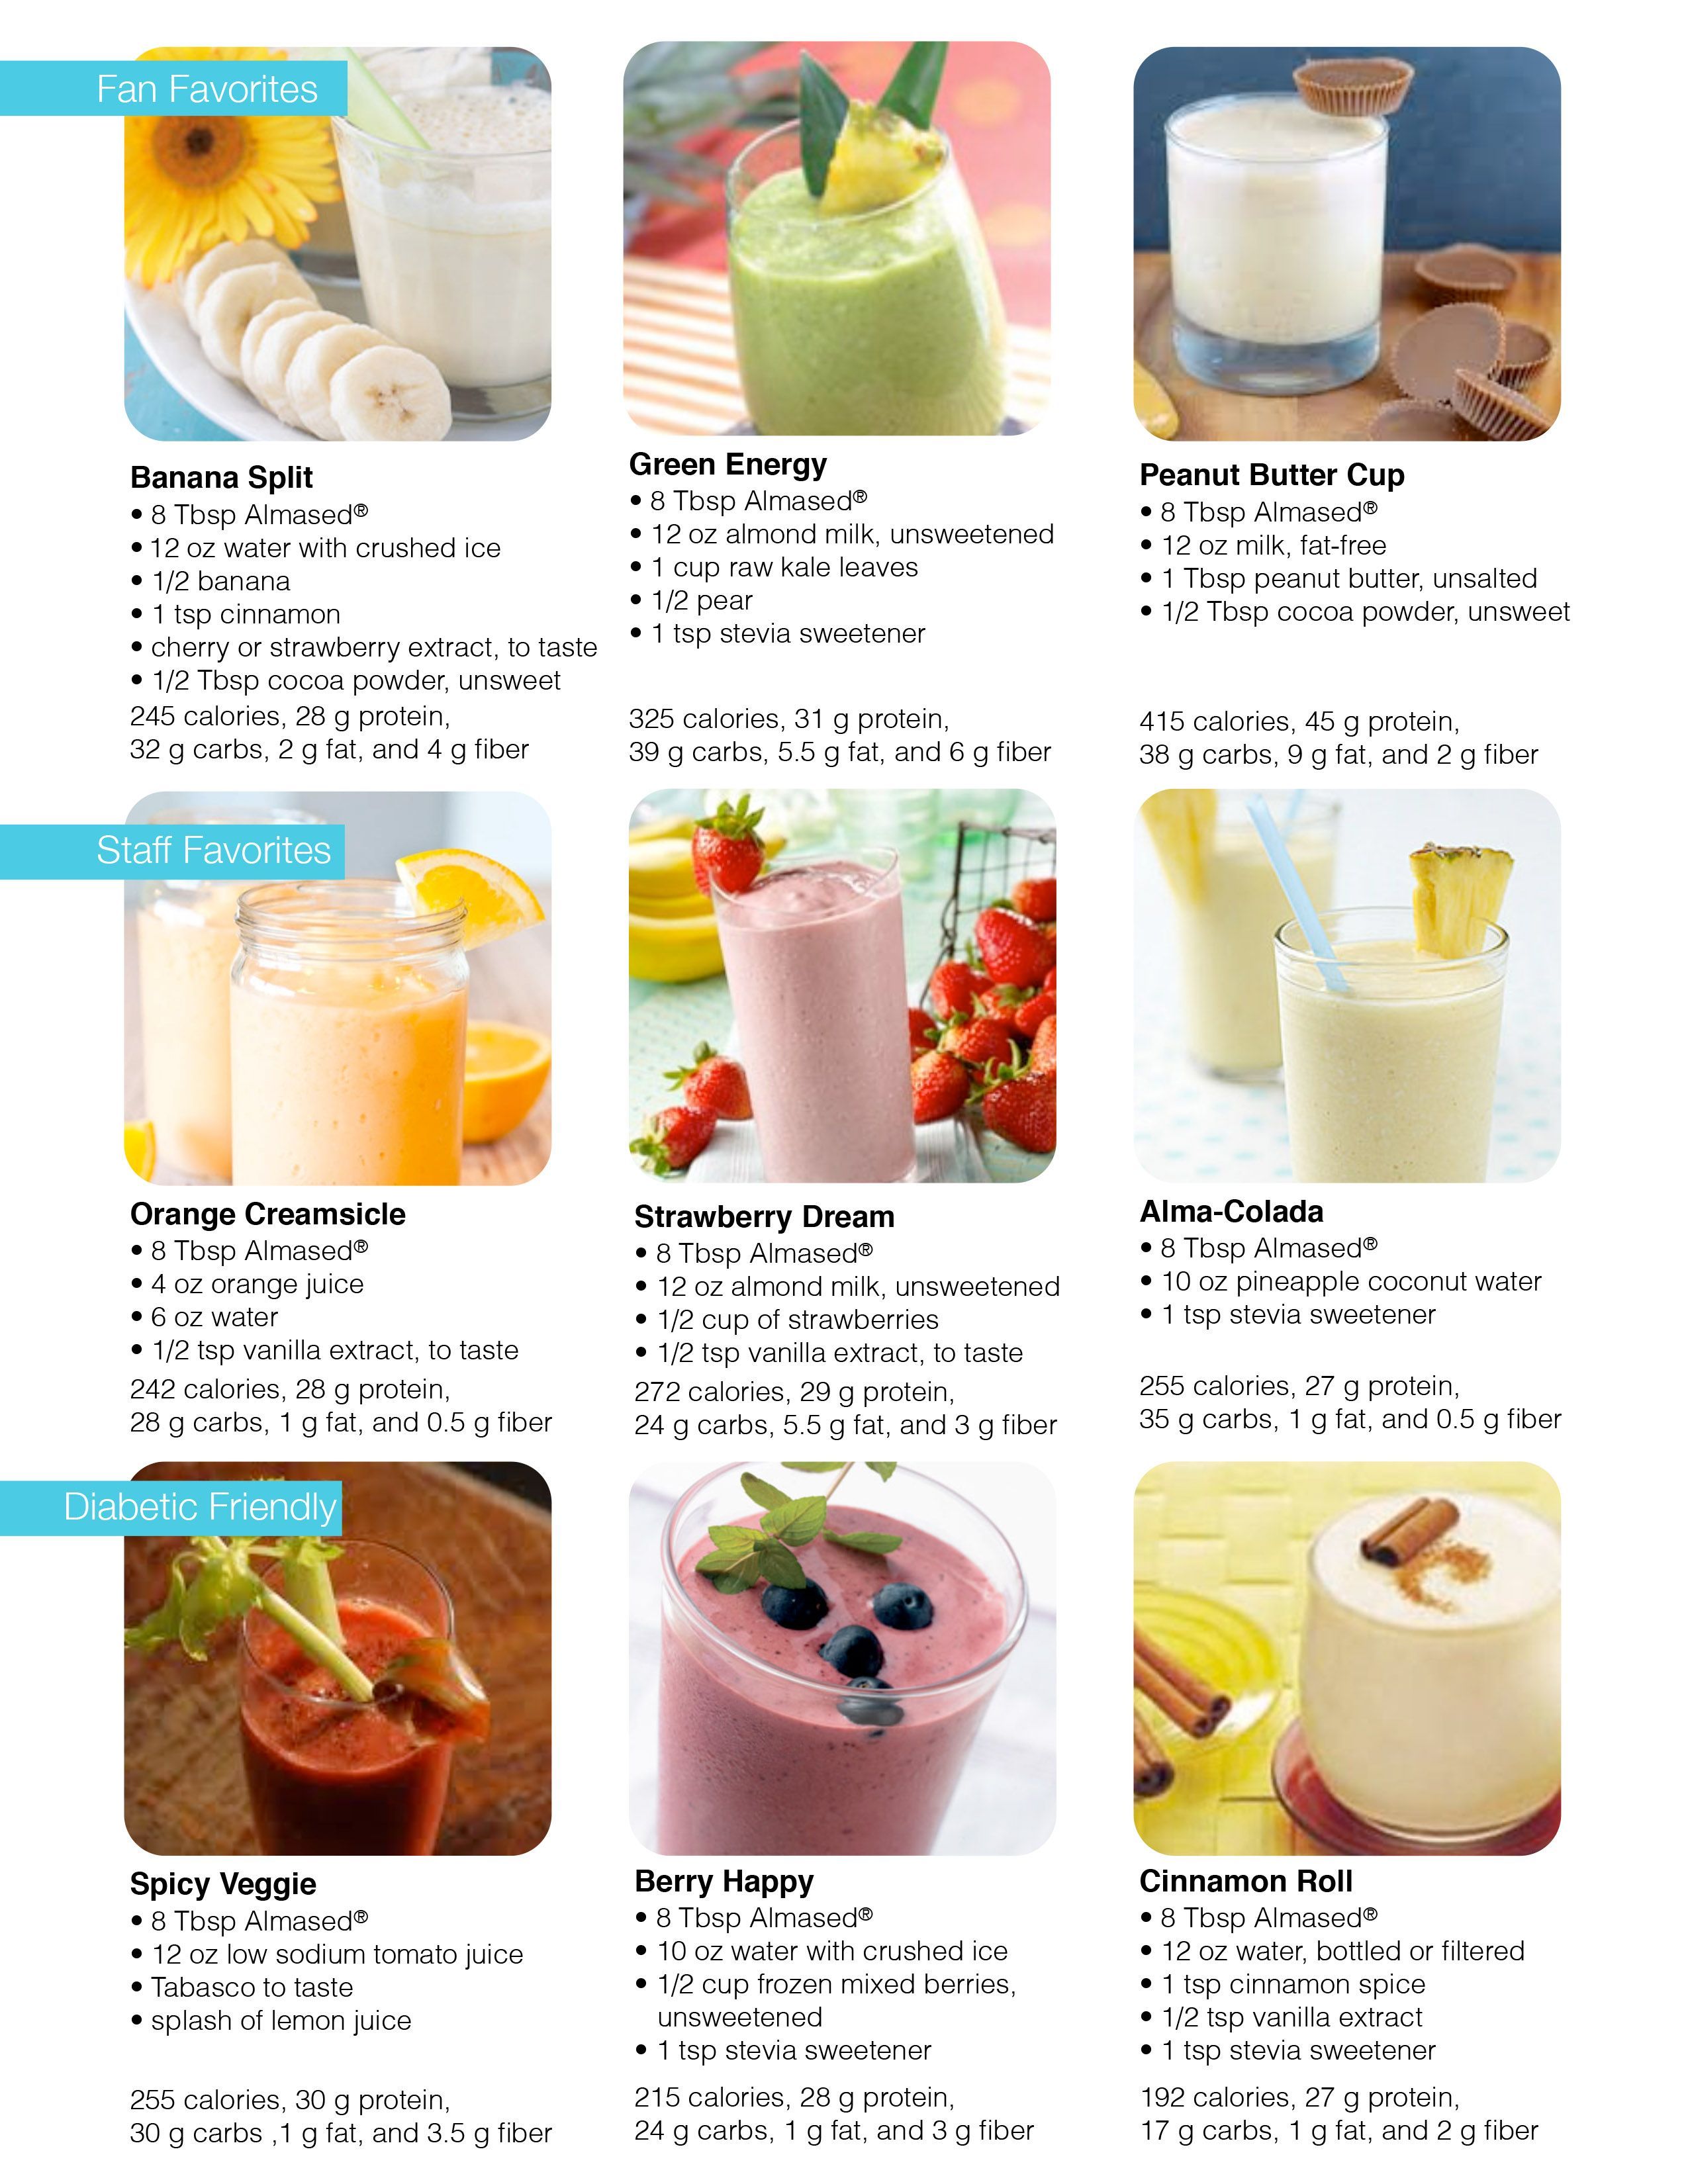 Check out a few of our Almased shake ideas. What are some of yours?